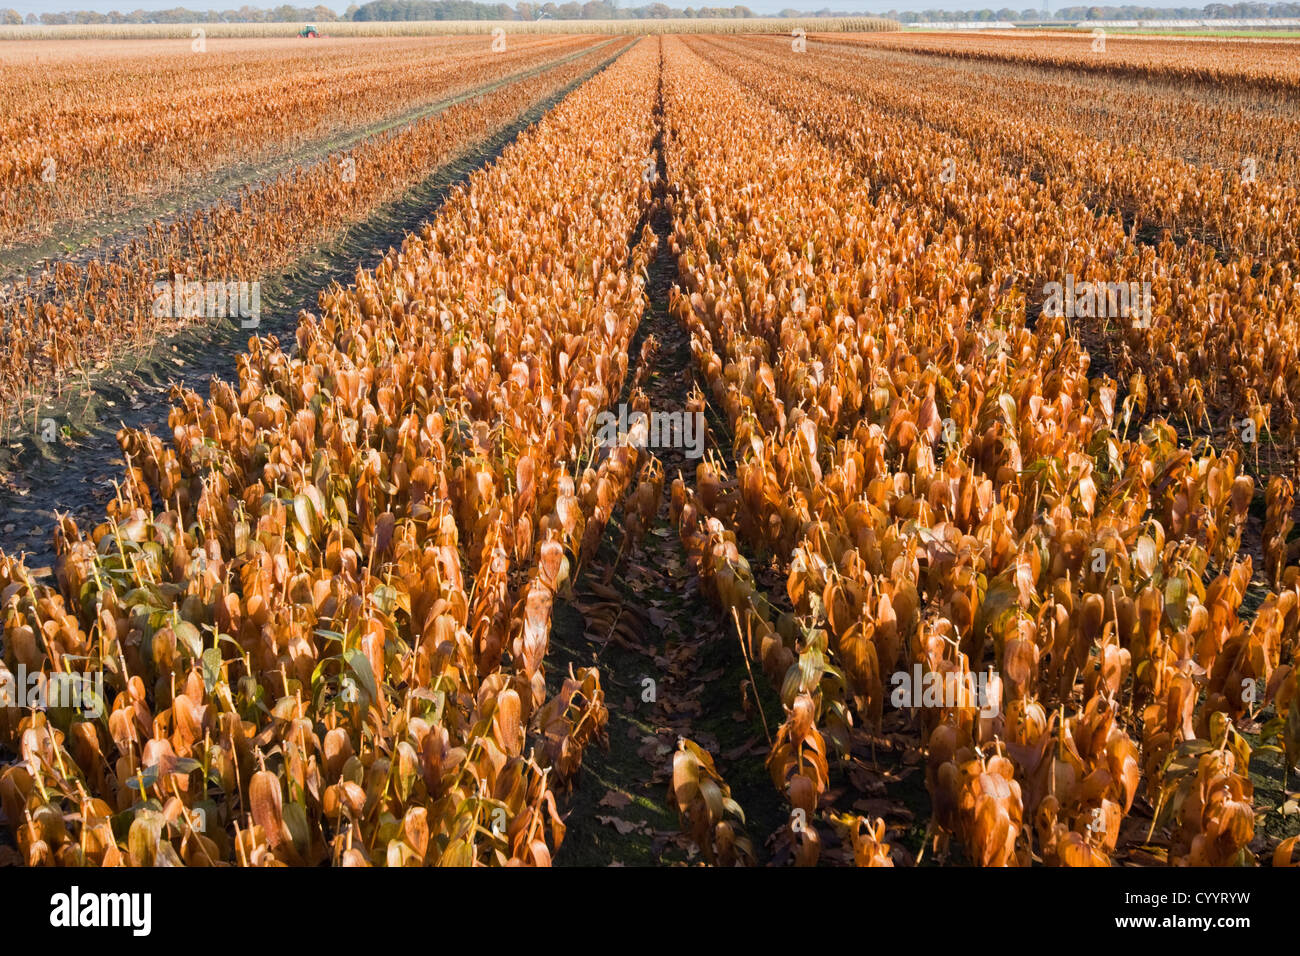 Wilted, brown Lilies on an agricultural field Stock Photo